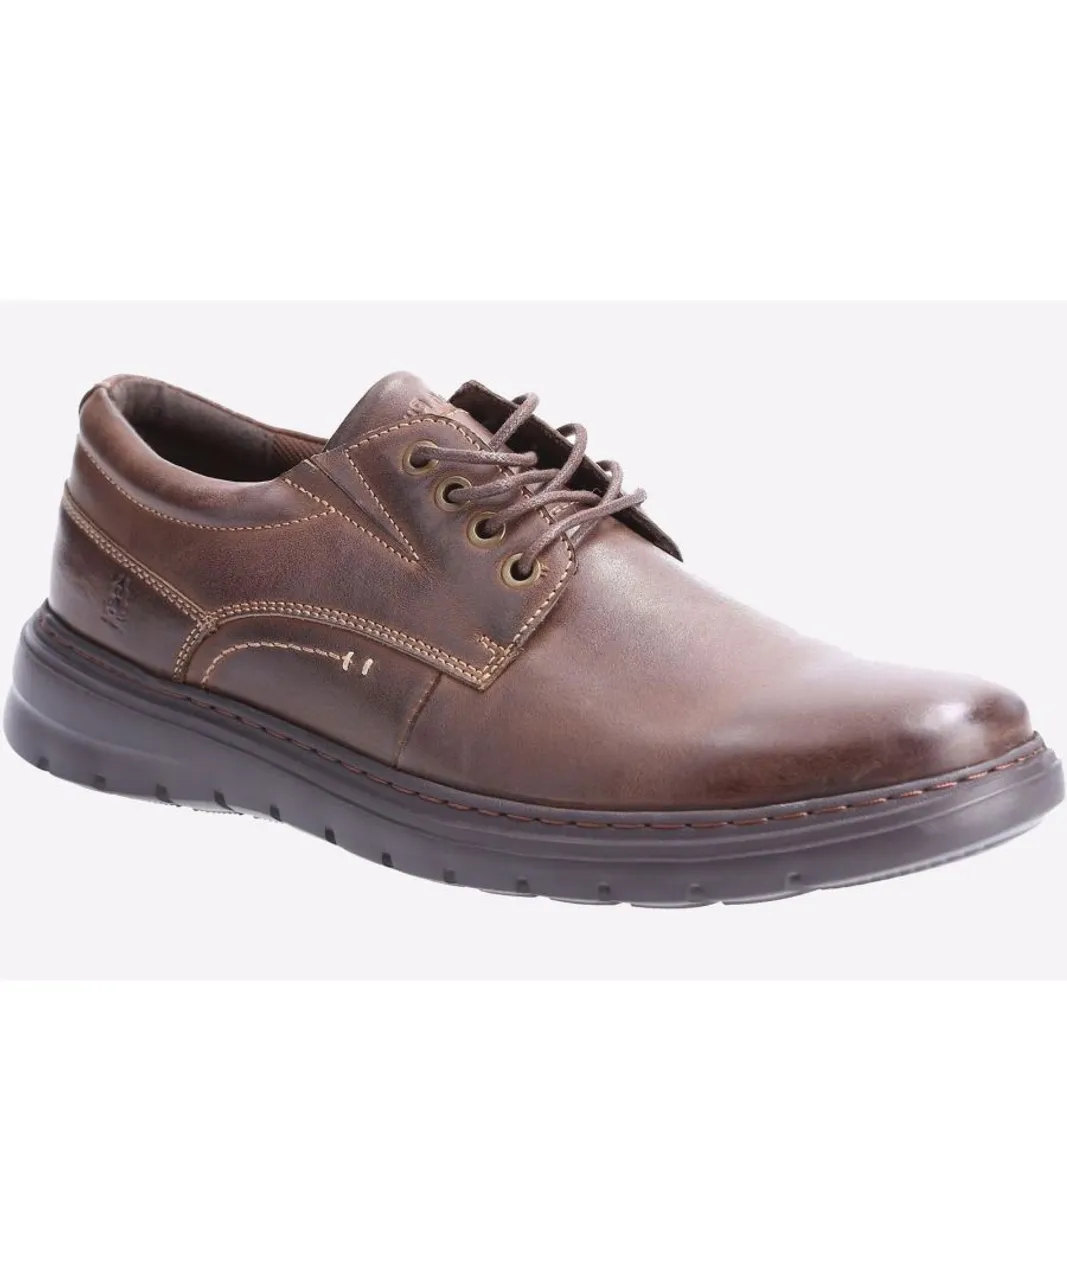 Hush Puppies Triton Leather Shoe Mens Brown Leather (archived)